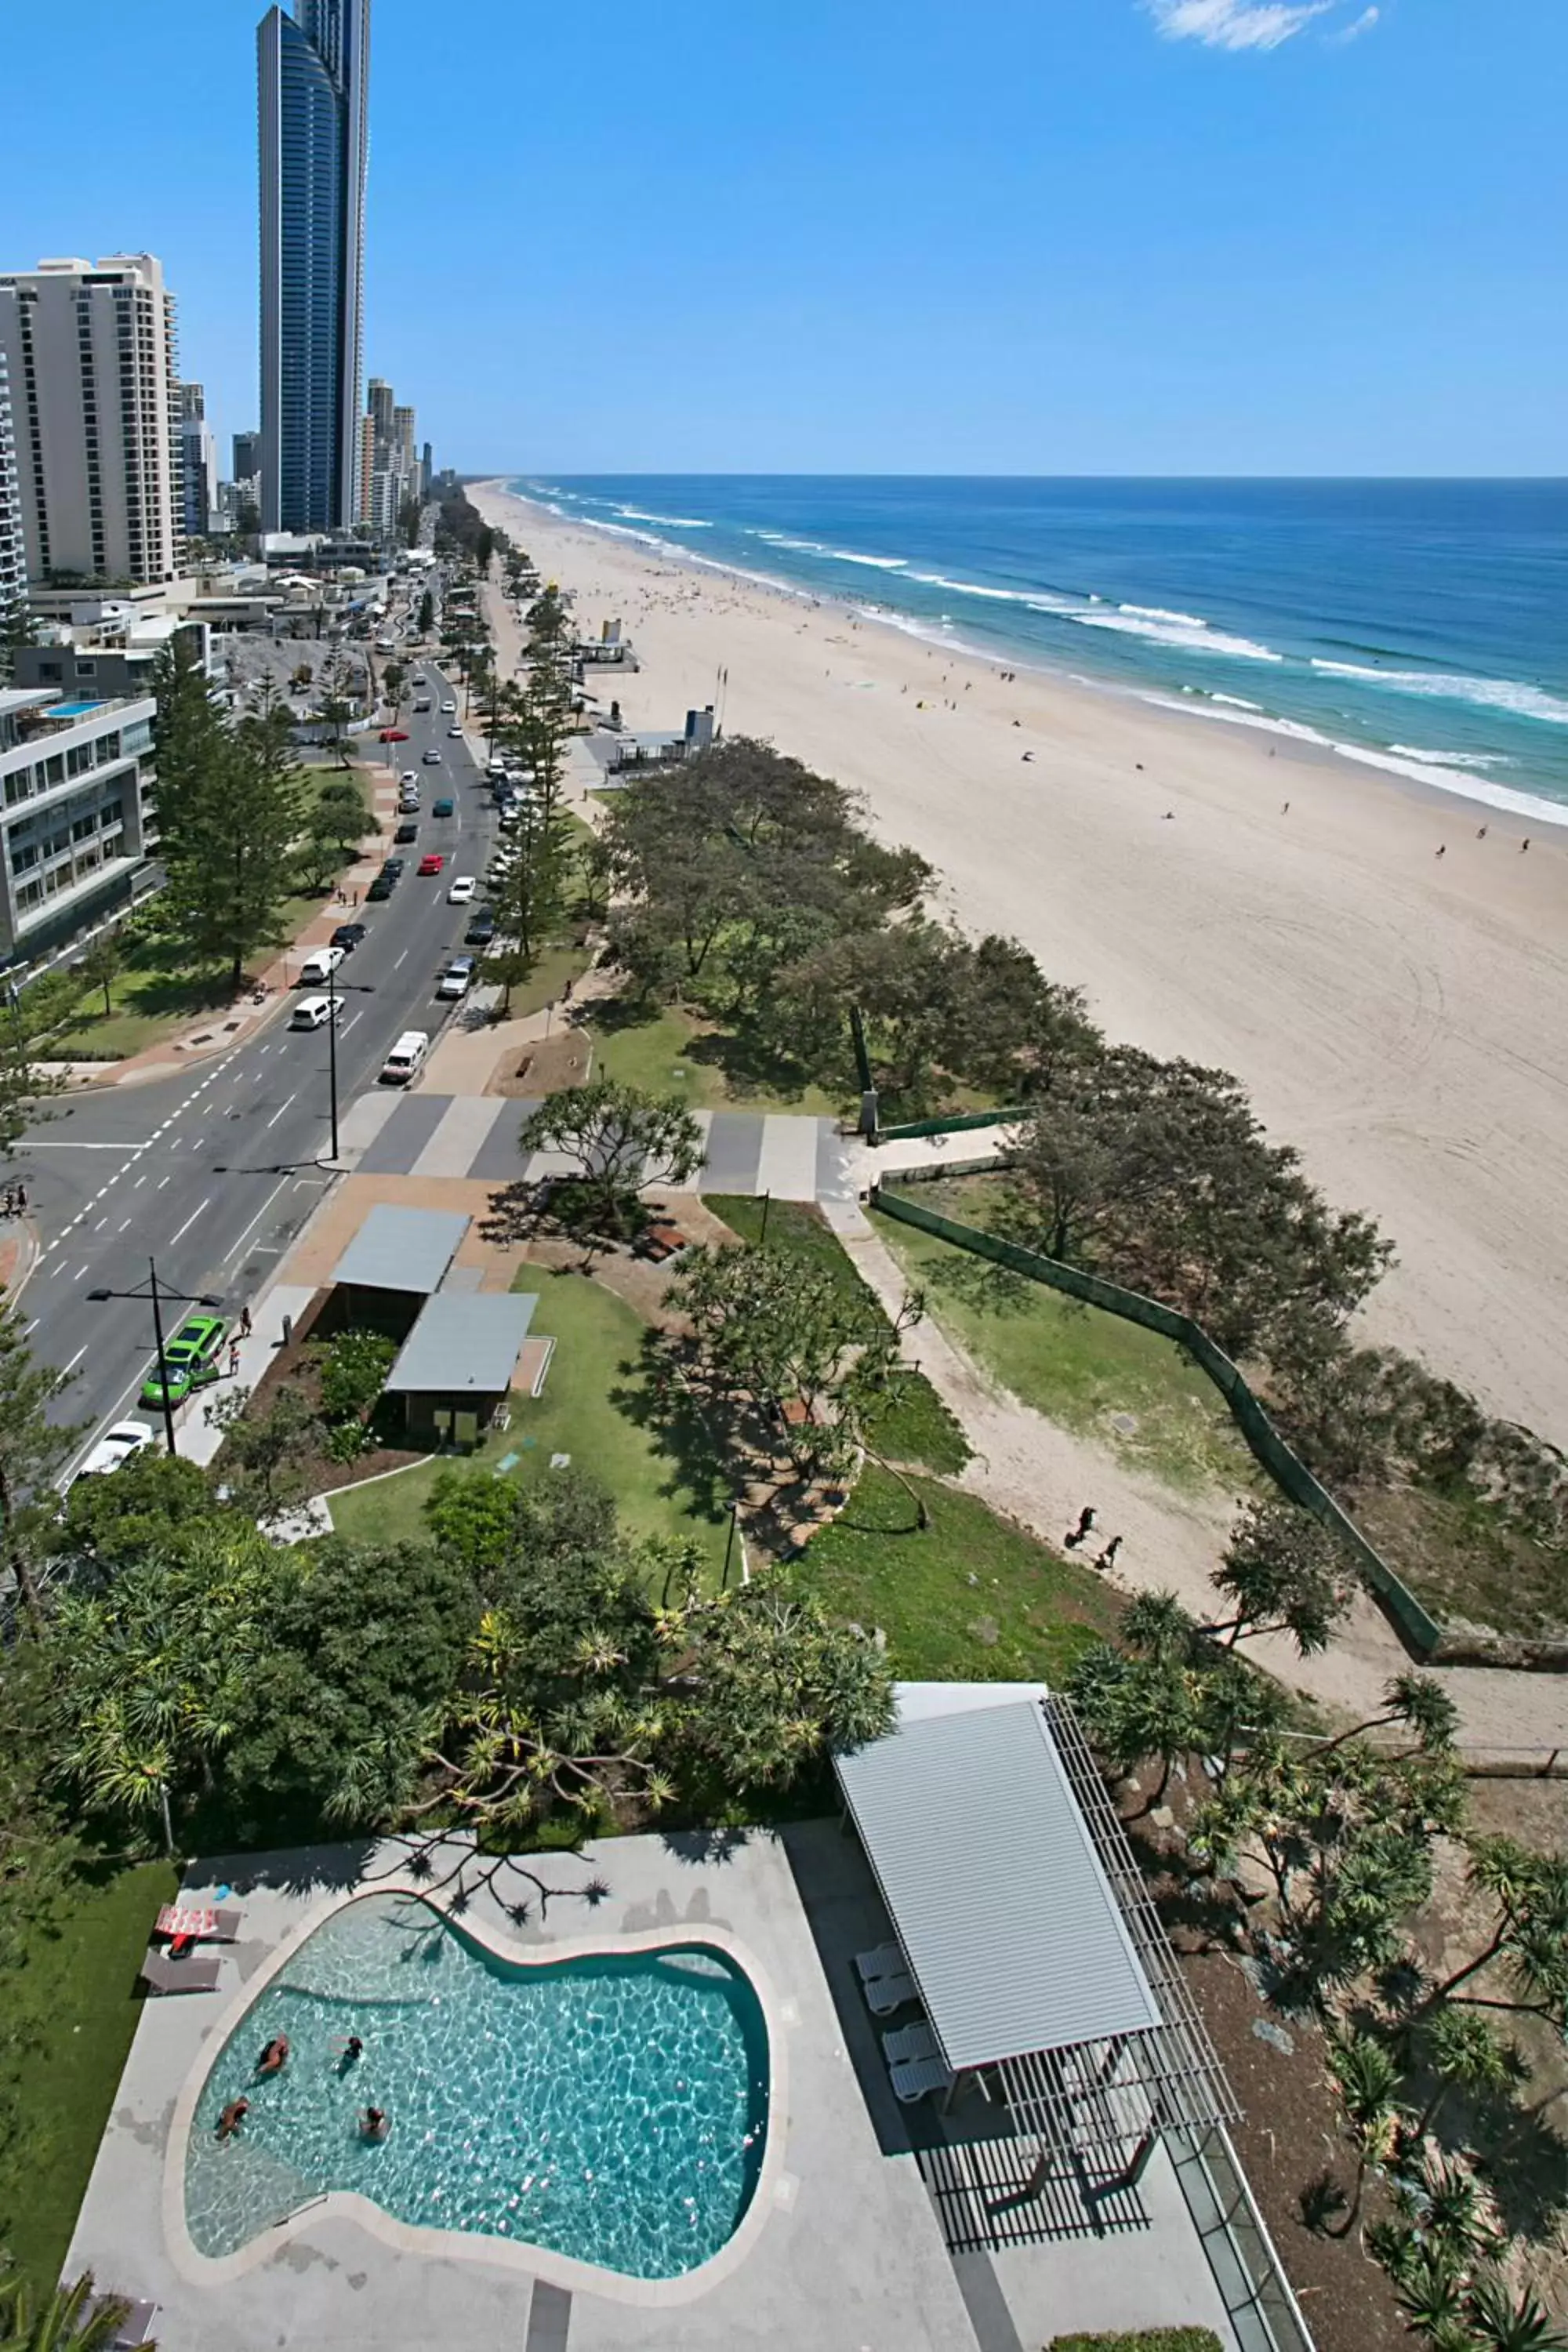 Property building, Bird's-eye View in One The Esplanade Apartments on Surfers Paradise